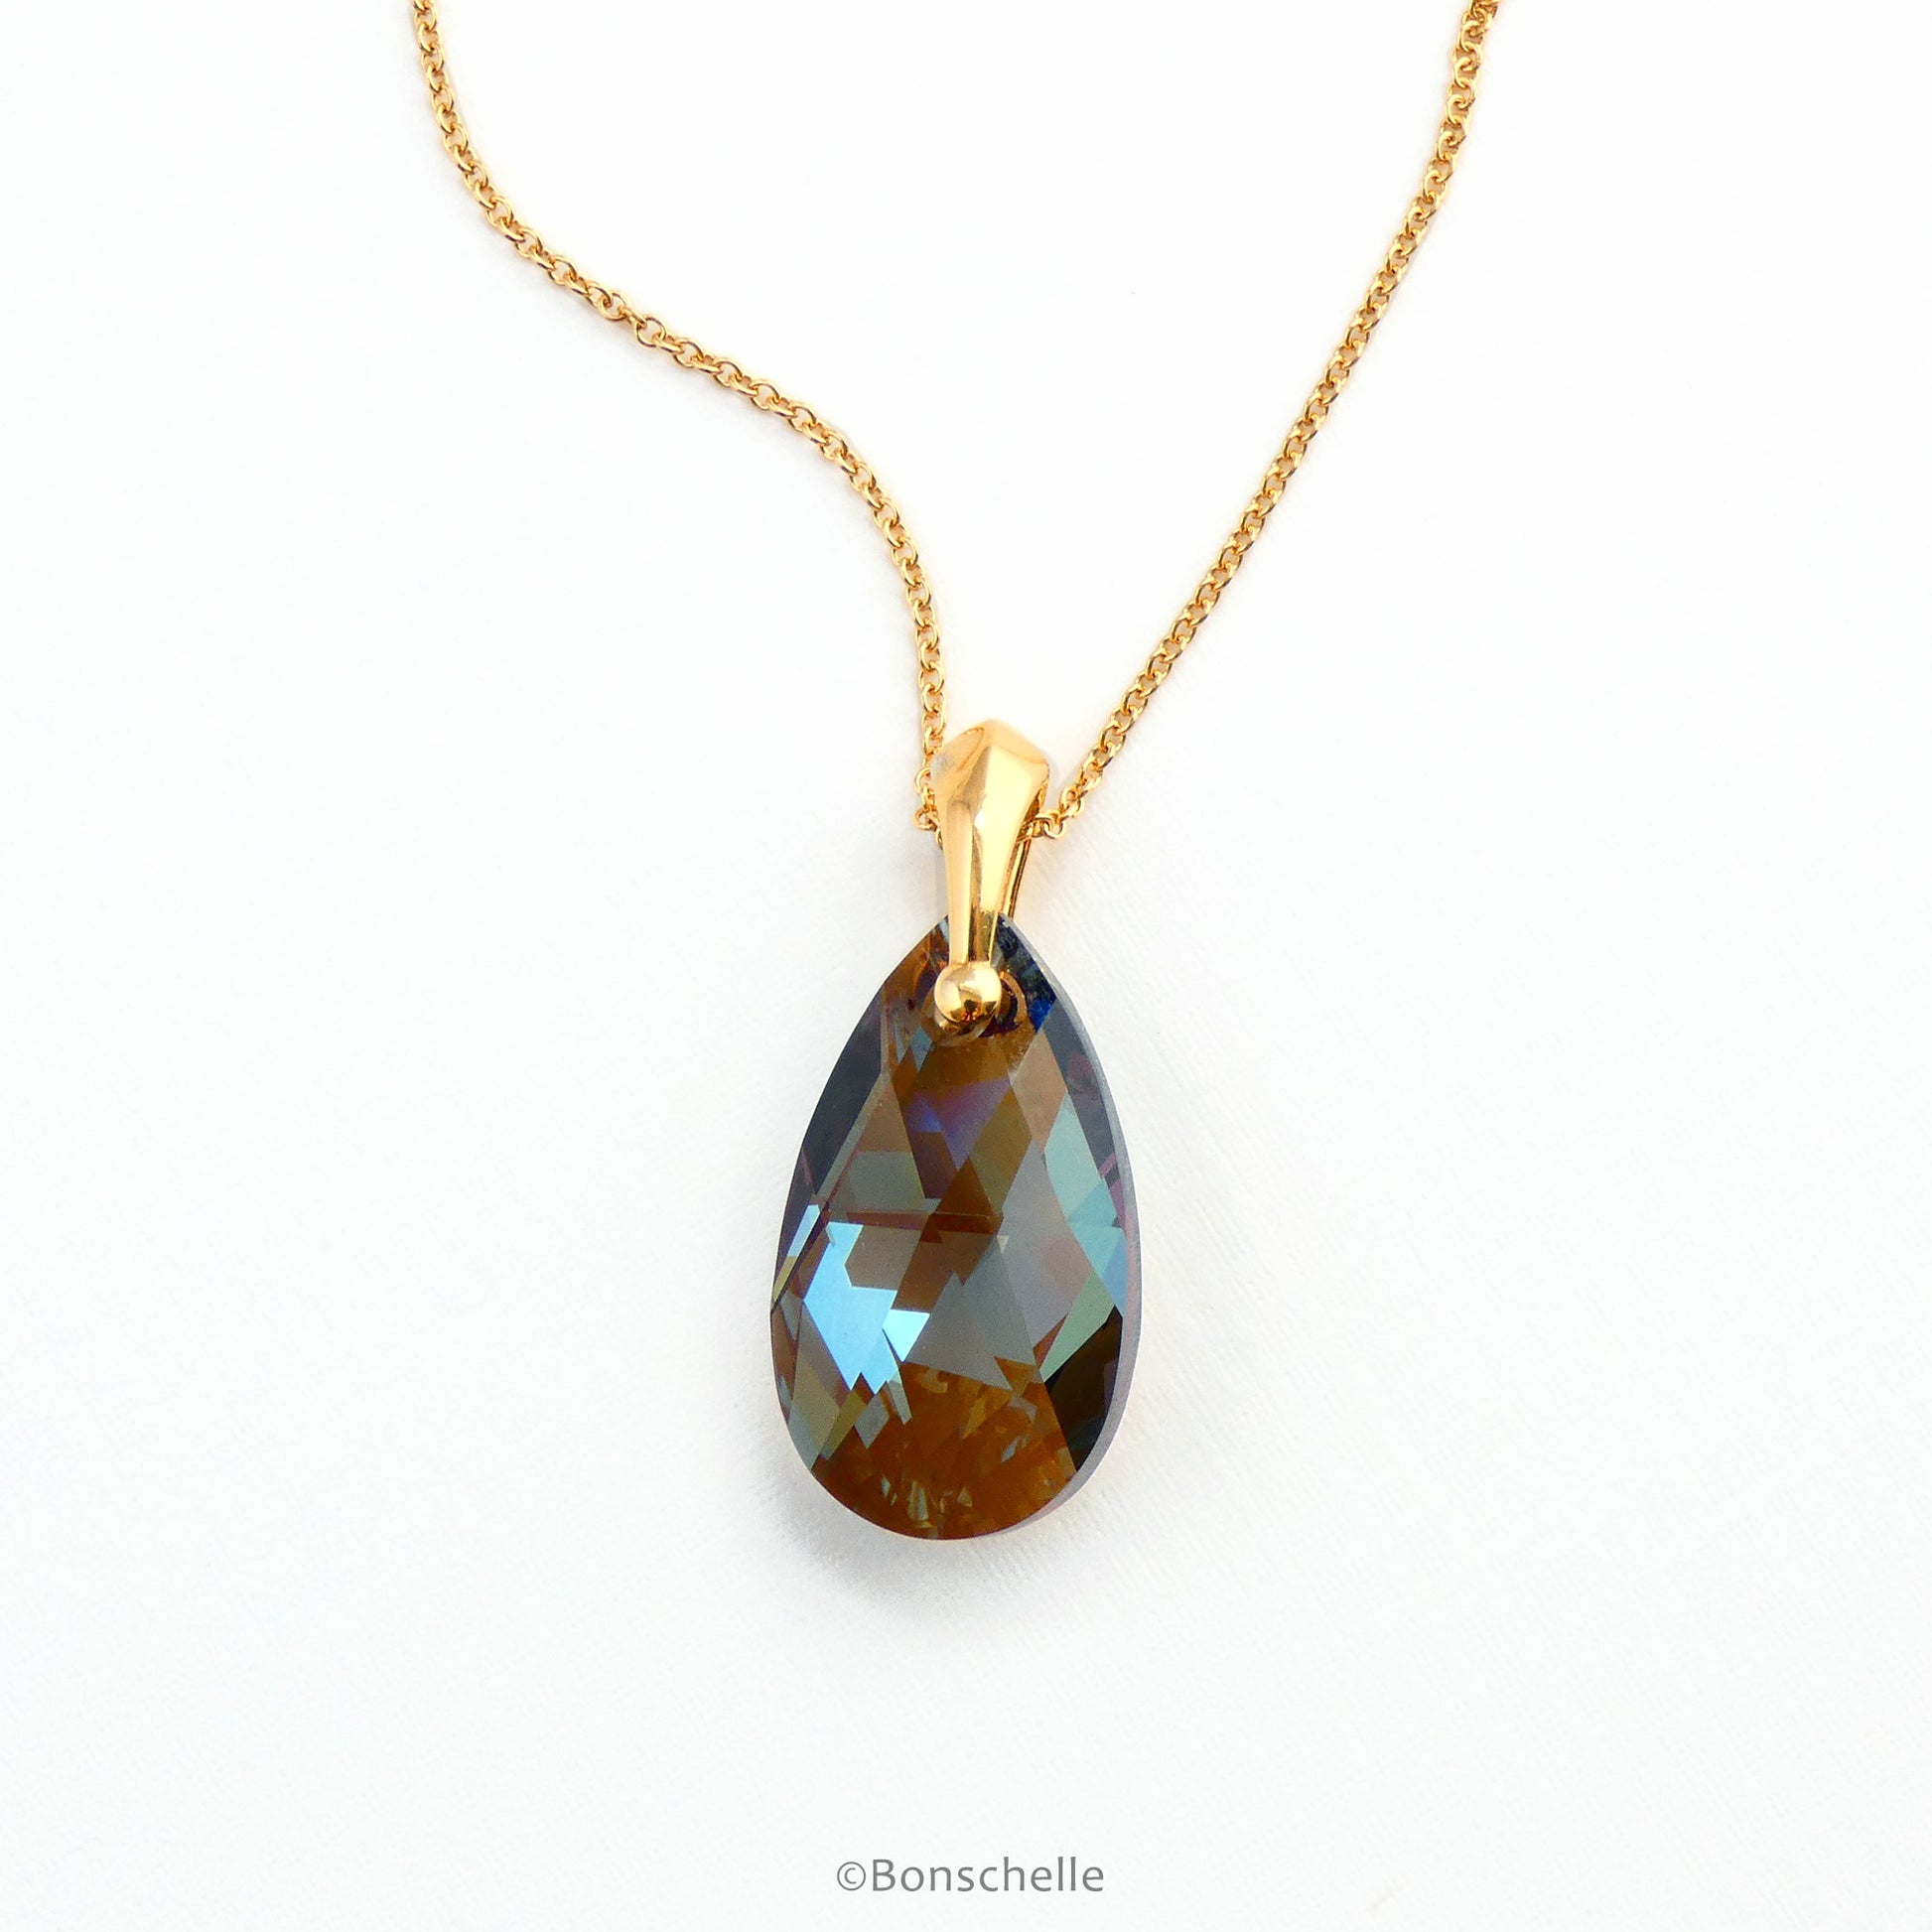 Handmade necklace with a bronze toned teardrop shape faceted crystal bead and 14K gold filled chain for women.